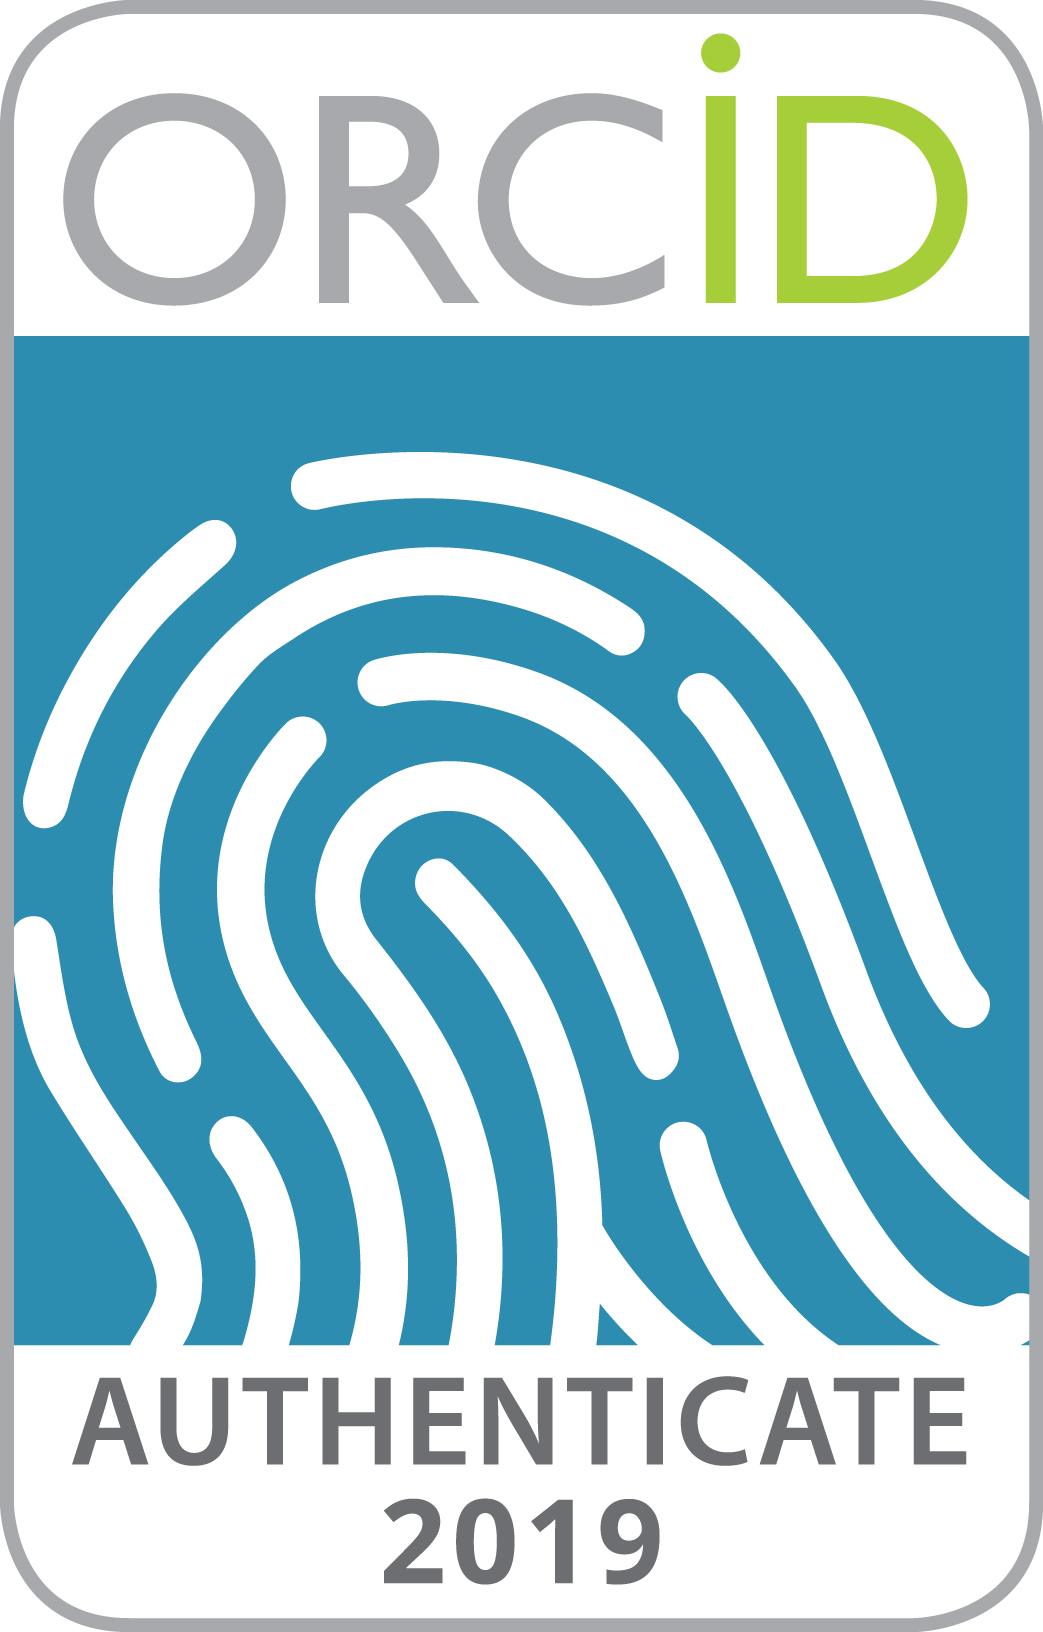 ORCID AUTHENTICATE Badge 2019